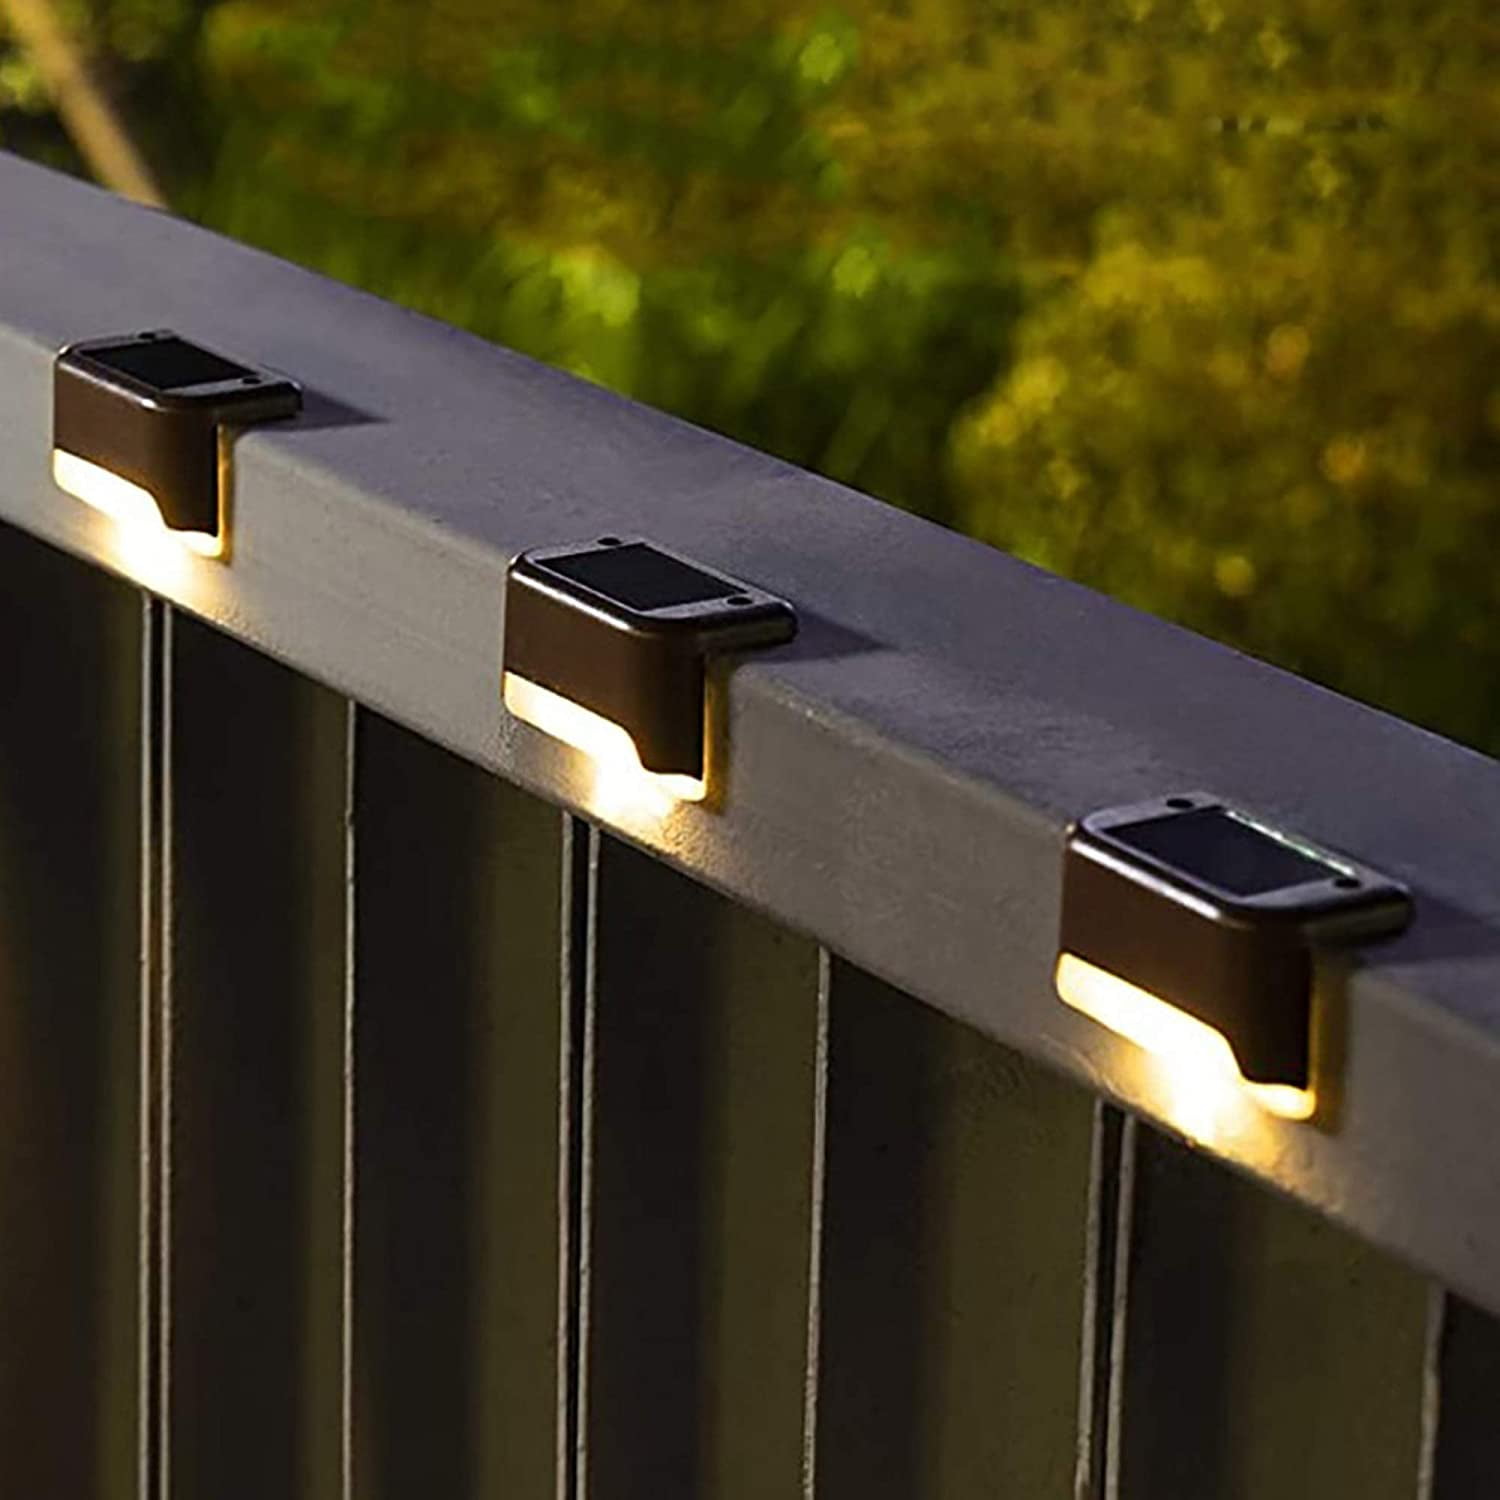 LED Solar Powered Stair Lights Dusk-To-Dawn Waterproof Garden Pathway Patio Lamp 